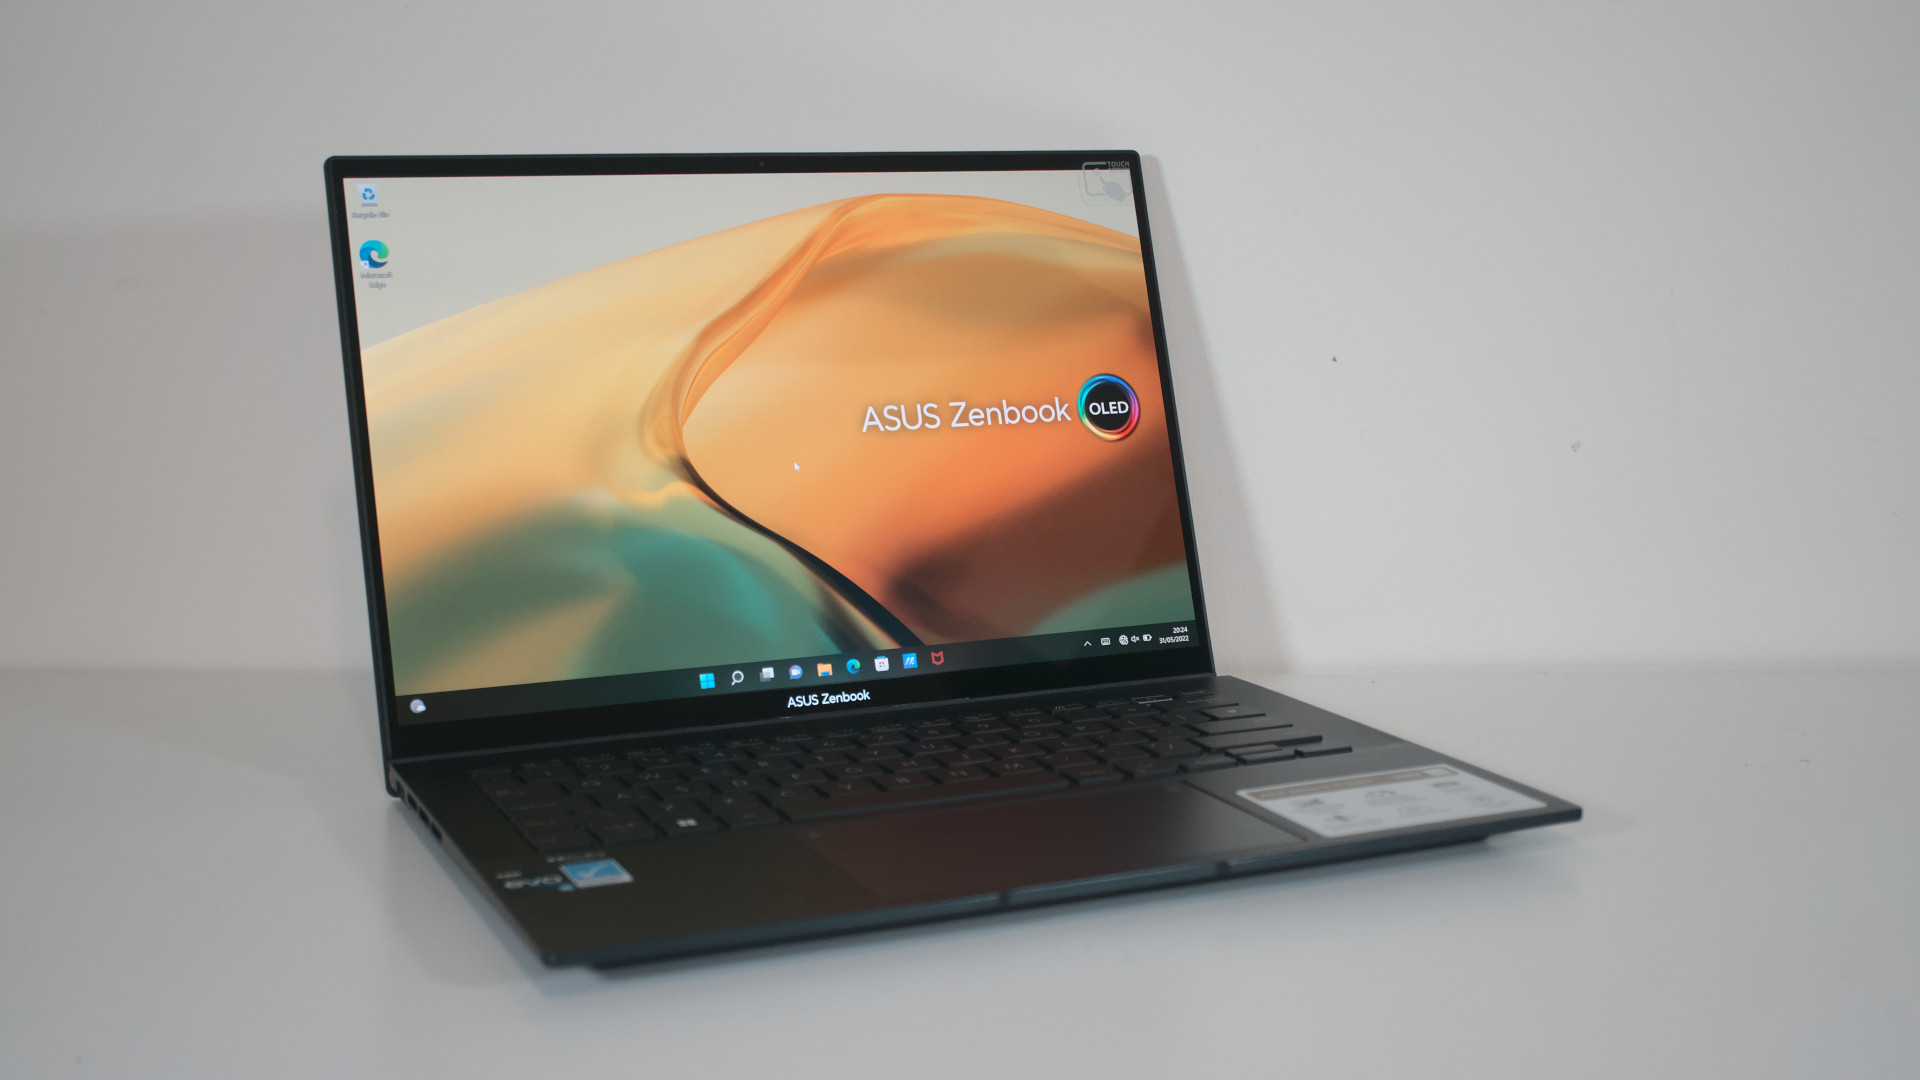 ASUS Zenbook 14 review: A lightweight laptop with a gorgeous OLED display